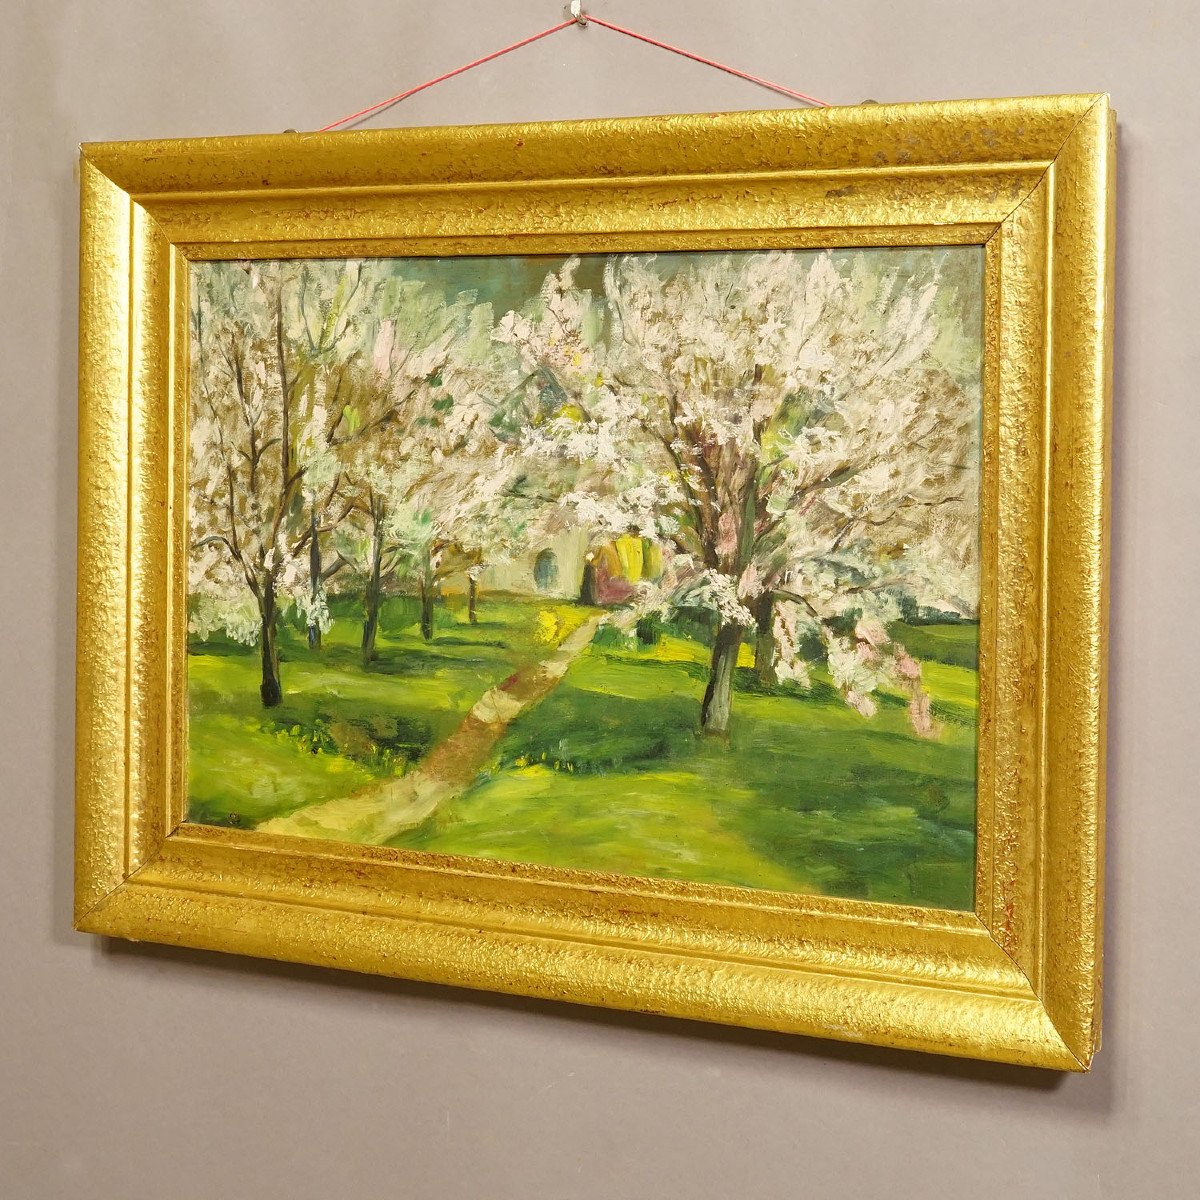 Impressionist Painting Of A Garden With Apple Trees In Bloom-photo-4